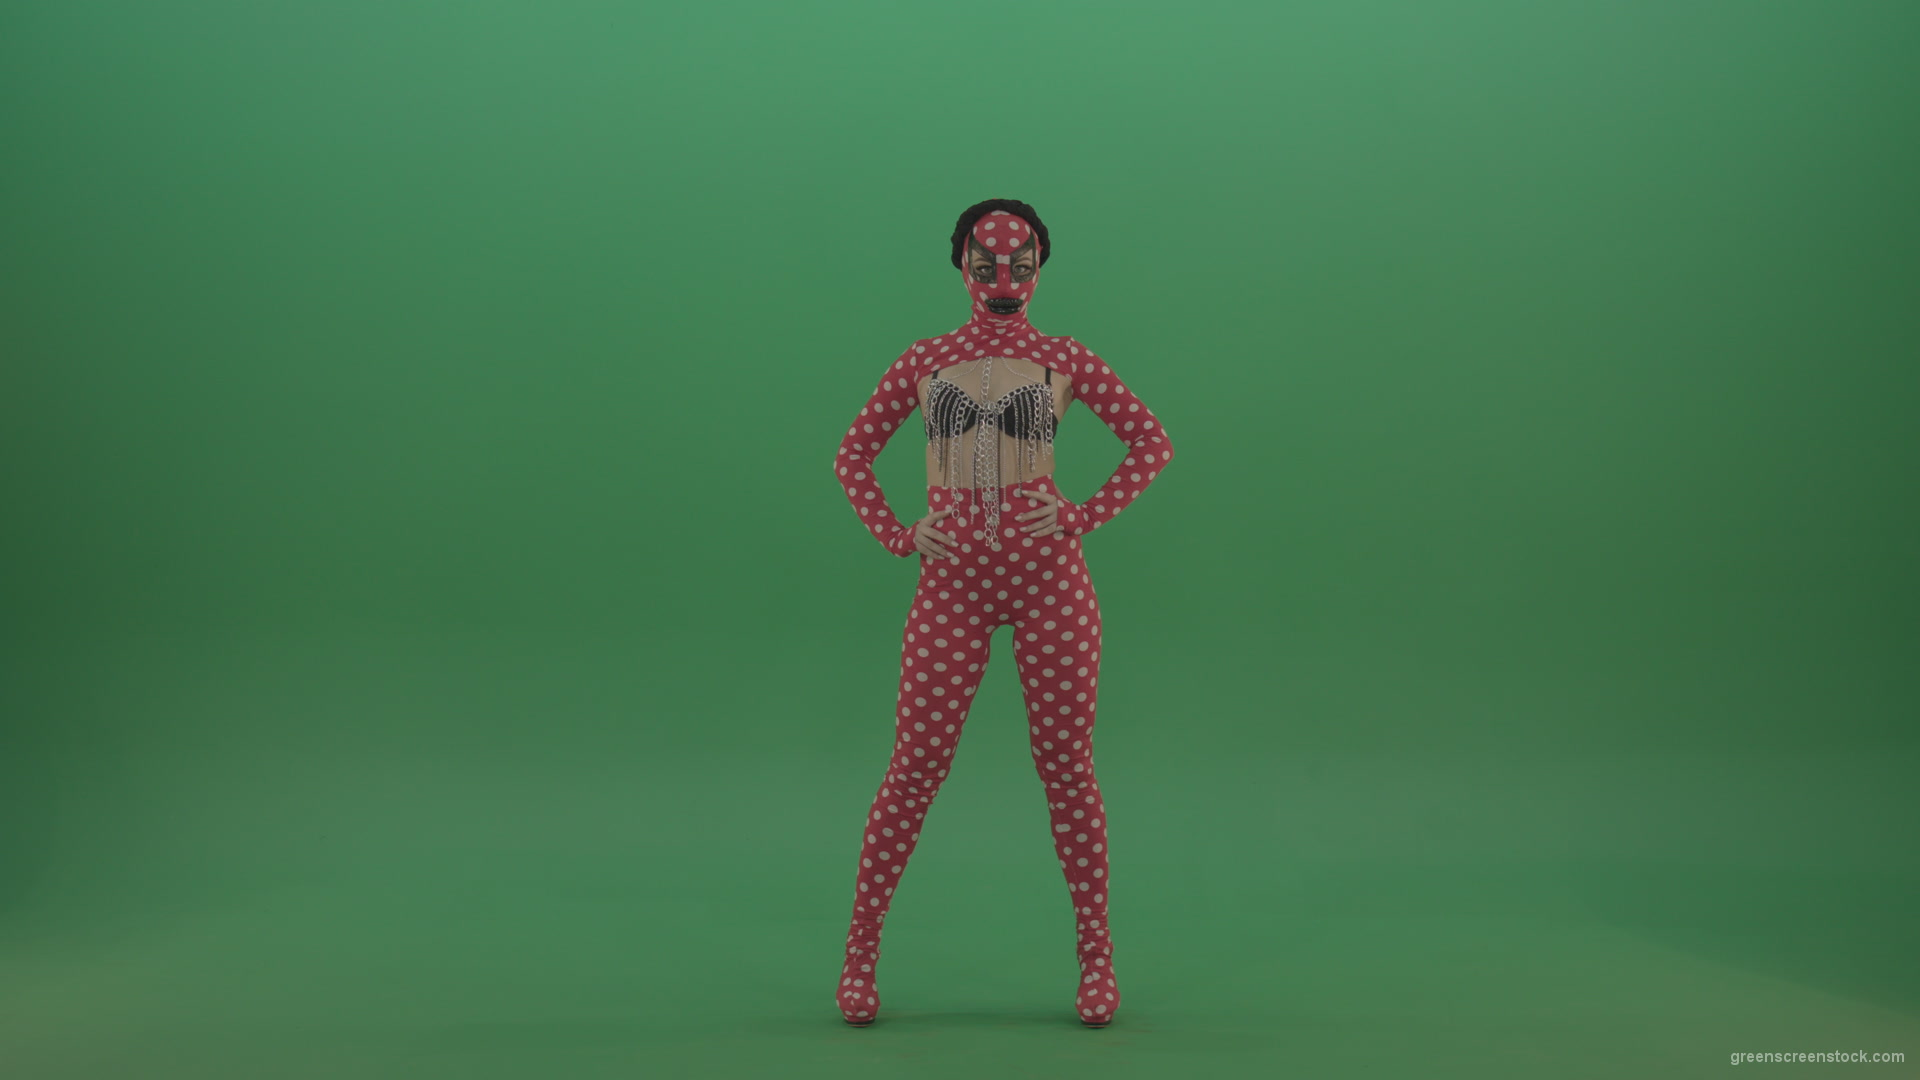 Girl-in-red-strip-dance-costume-in-front-view-posing-isolated-on-green-screen_009 Green Screen Stock